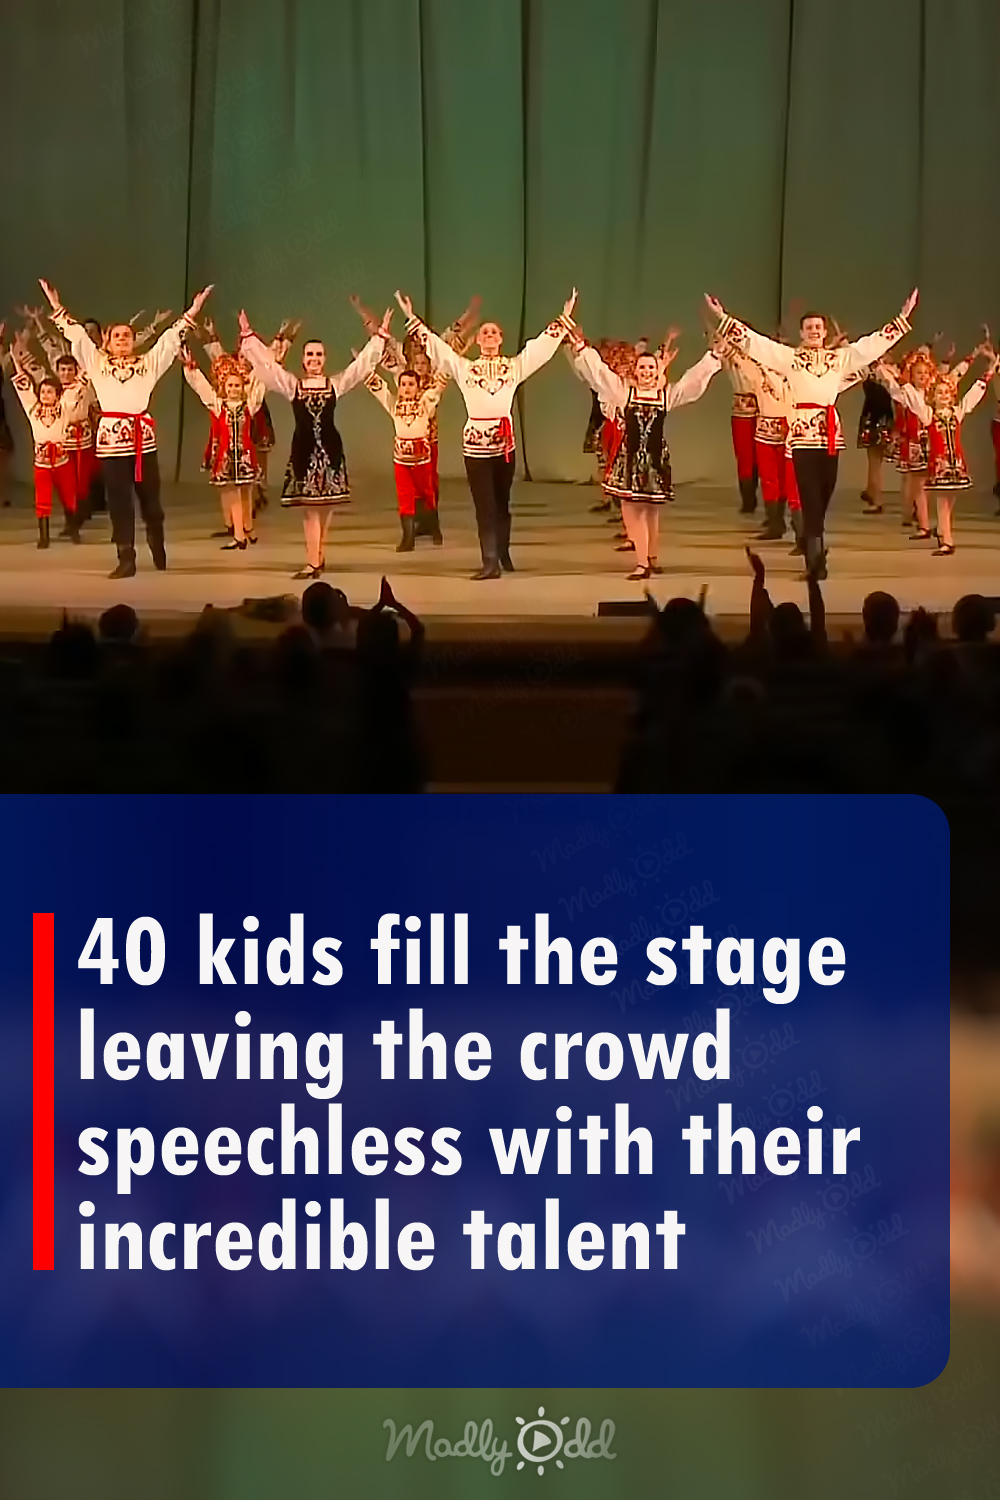 40 kids fill the stage leaving the crowd speechless with their incredible talent